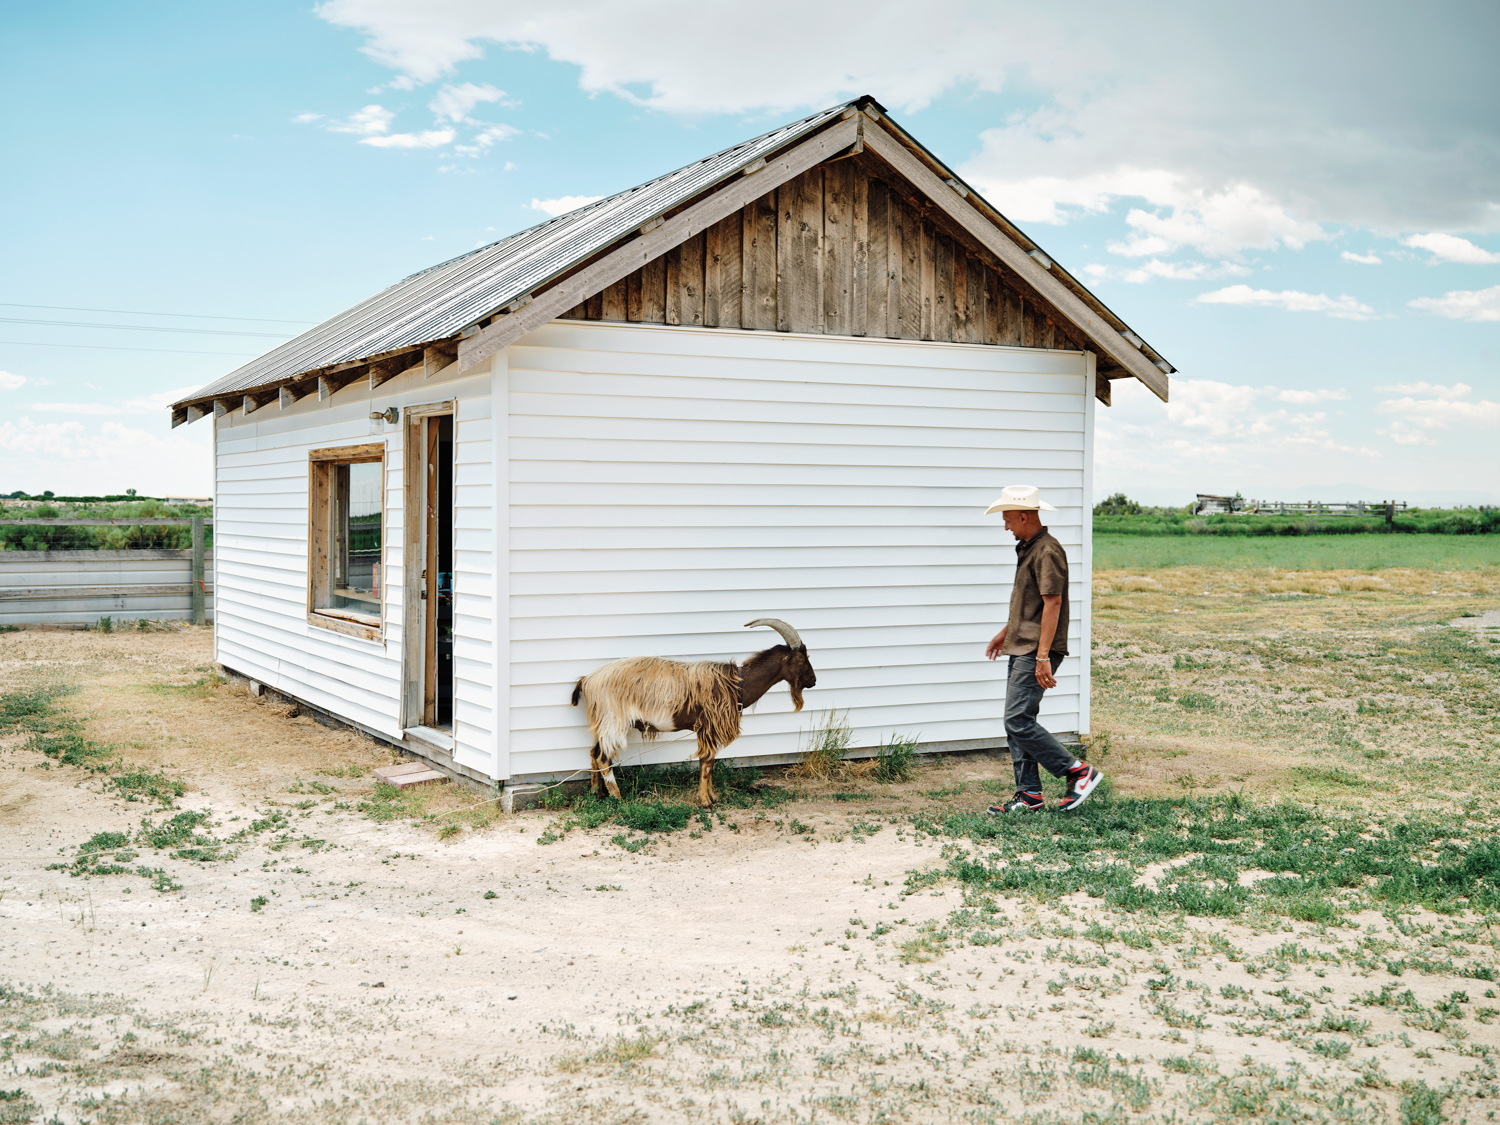 Kristopher Wright standing with goat outside of small white and wood shed on ranch surroundings